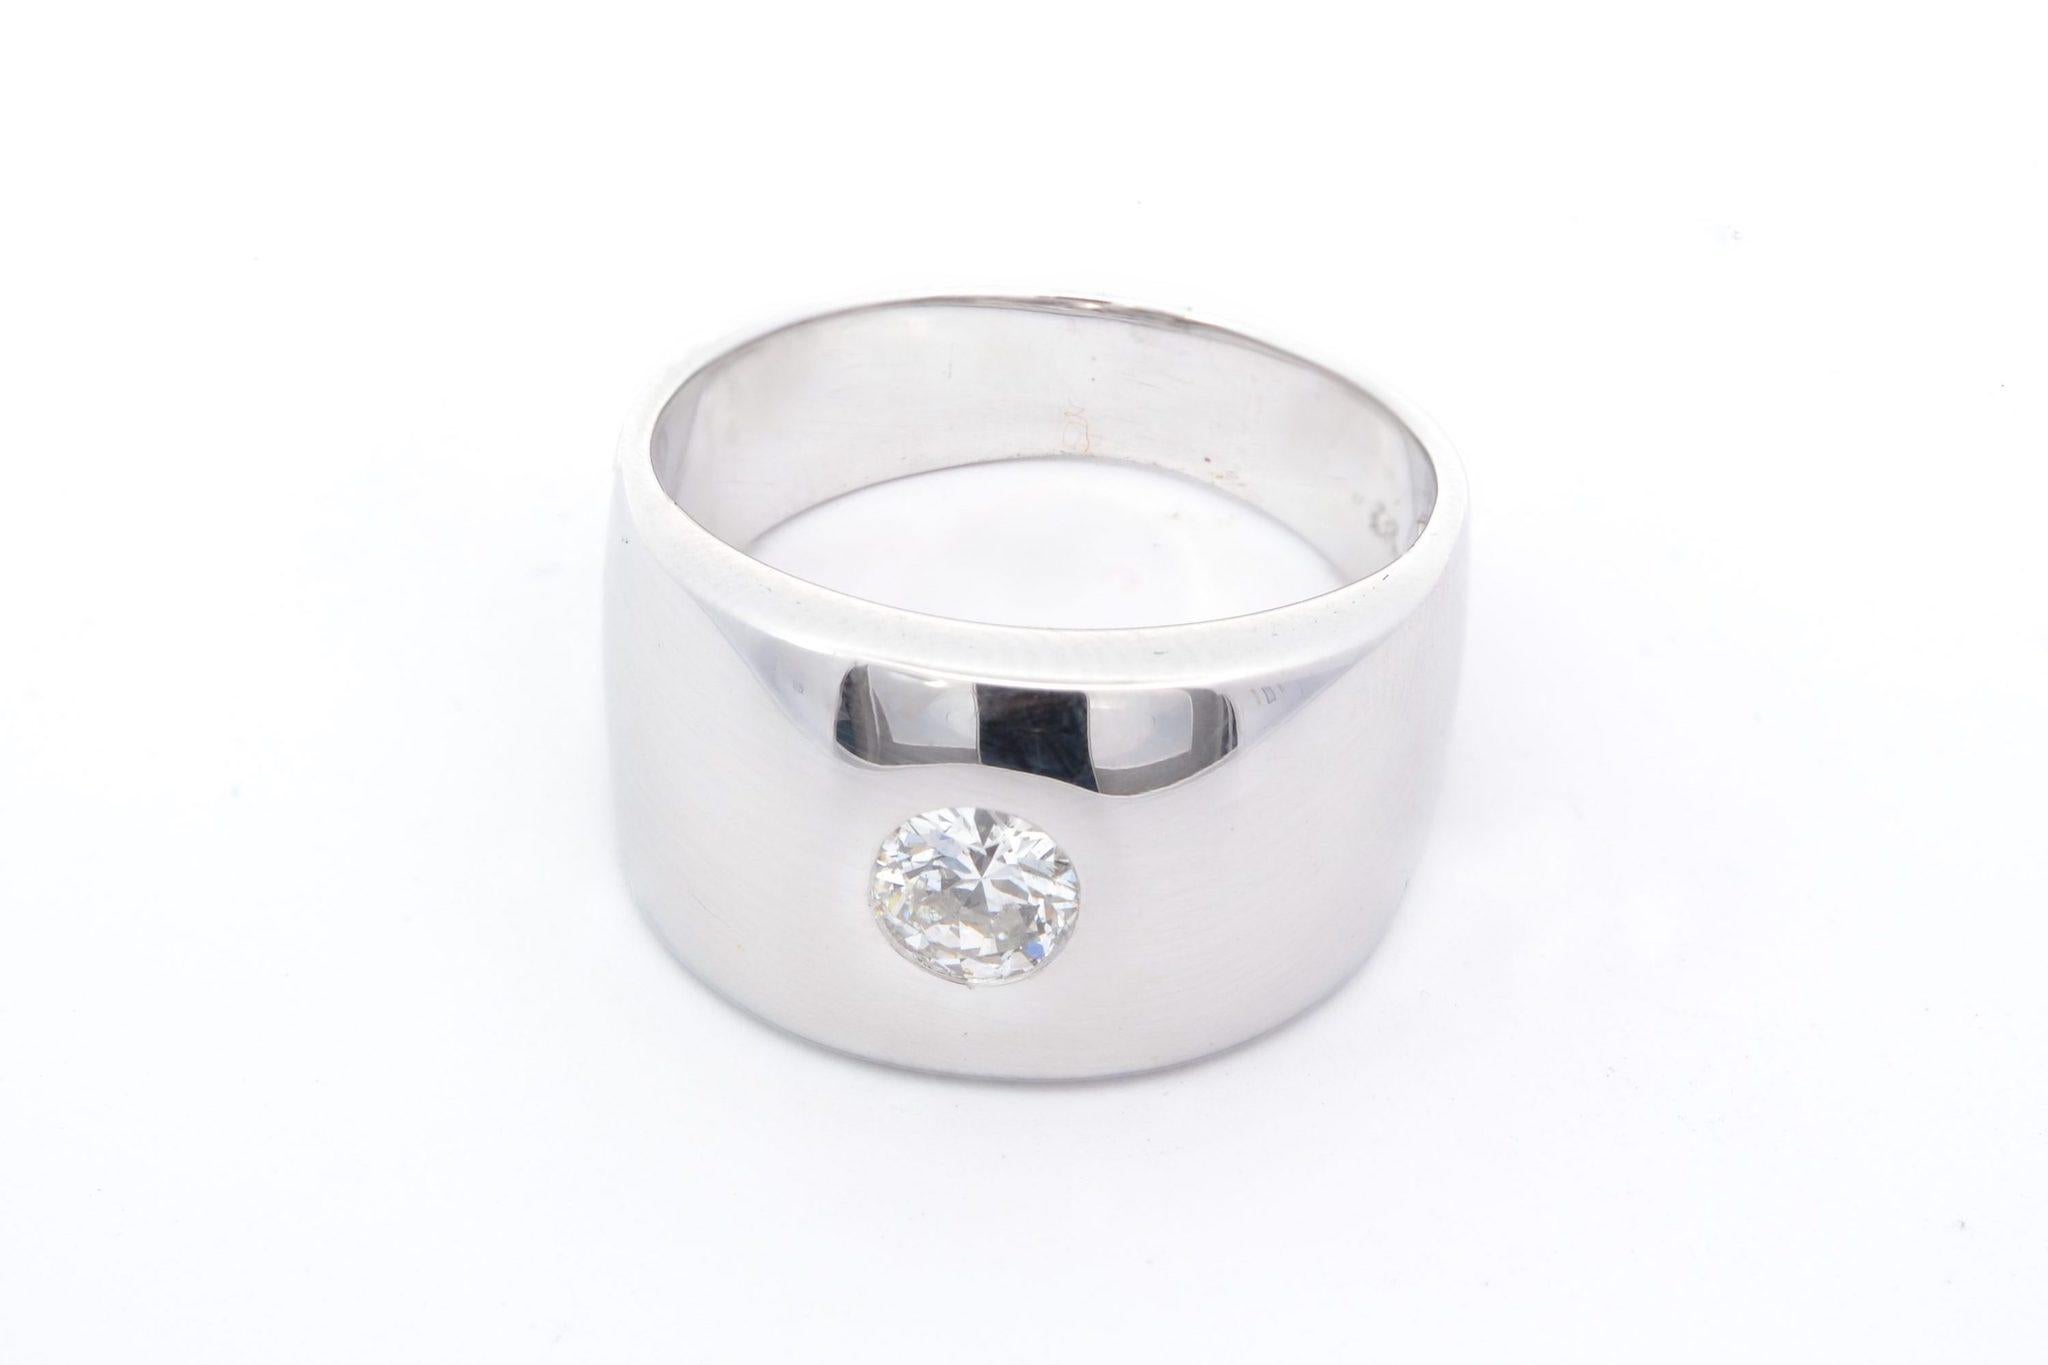 Stones: 1 diamond of 0.45ct
Material: 18k white gold
Dimensions: width 1.2cm
Weight: 10.8g
Period: Recent
Size: 60 (free sizing)
Certificate
Ref. : 25097